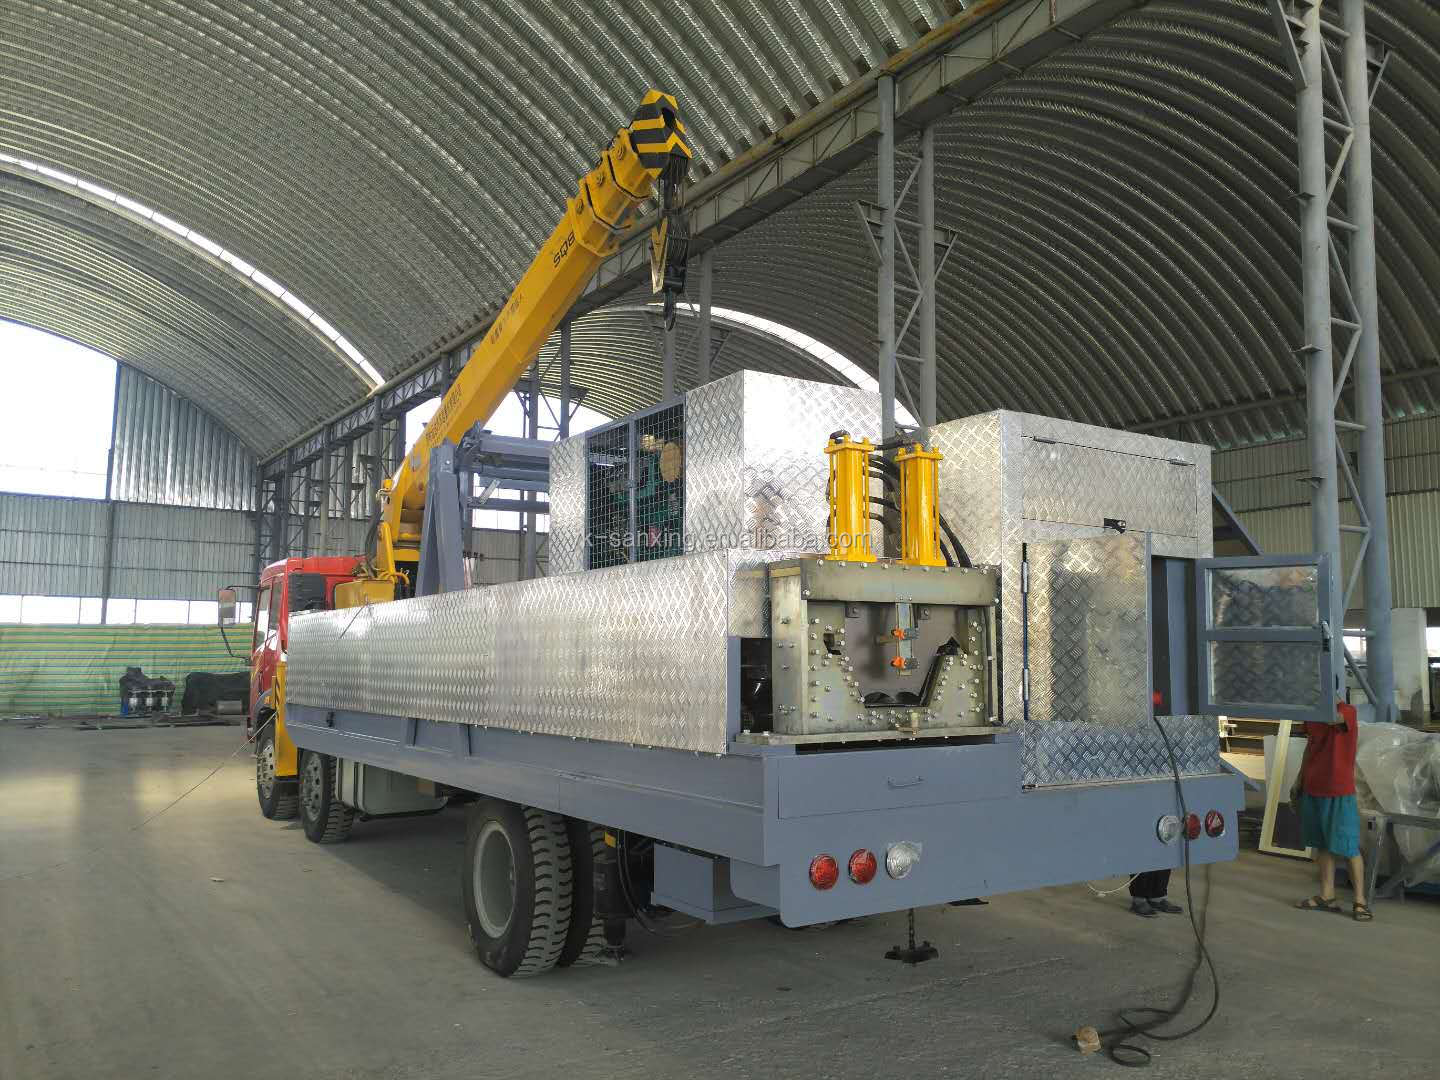 SANXING K Qspan SUBM240 SX-914-610  arch roof forming machine vertical type roof building machine